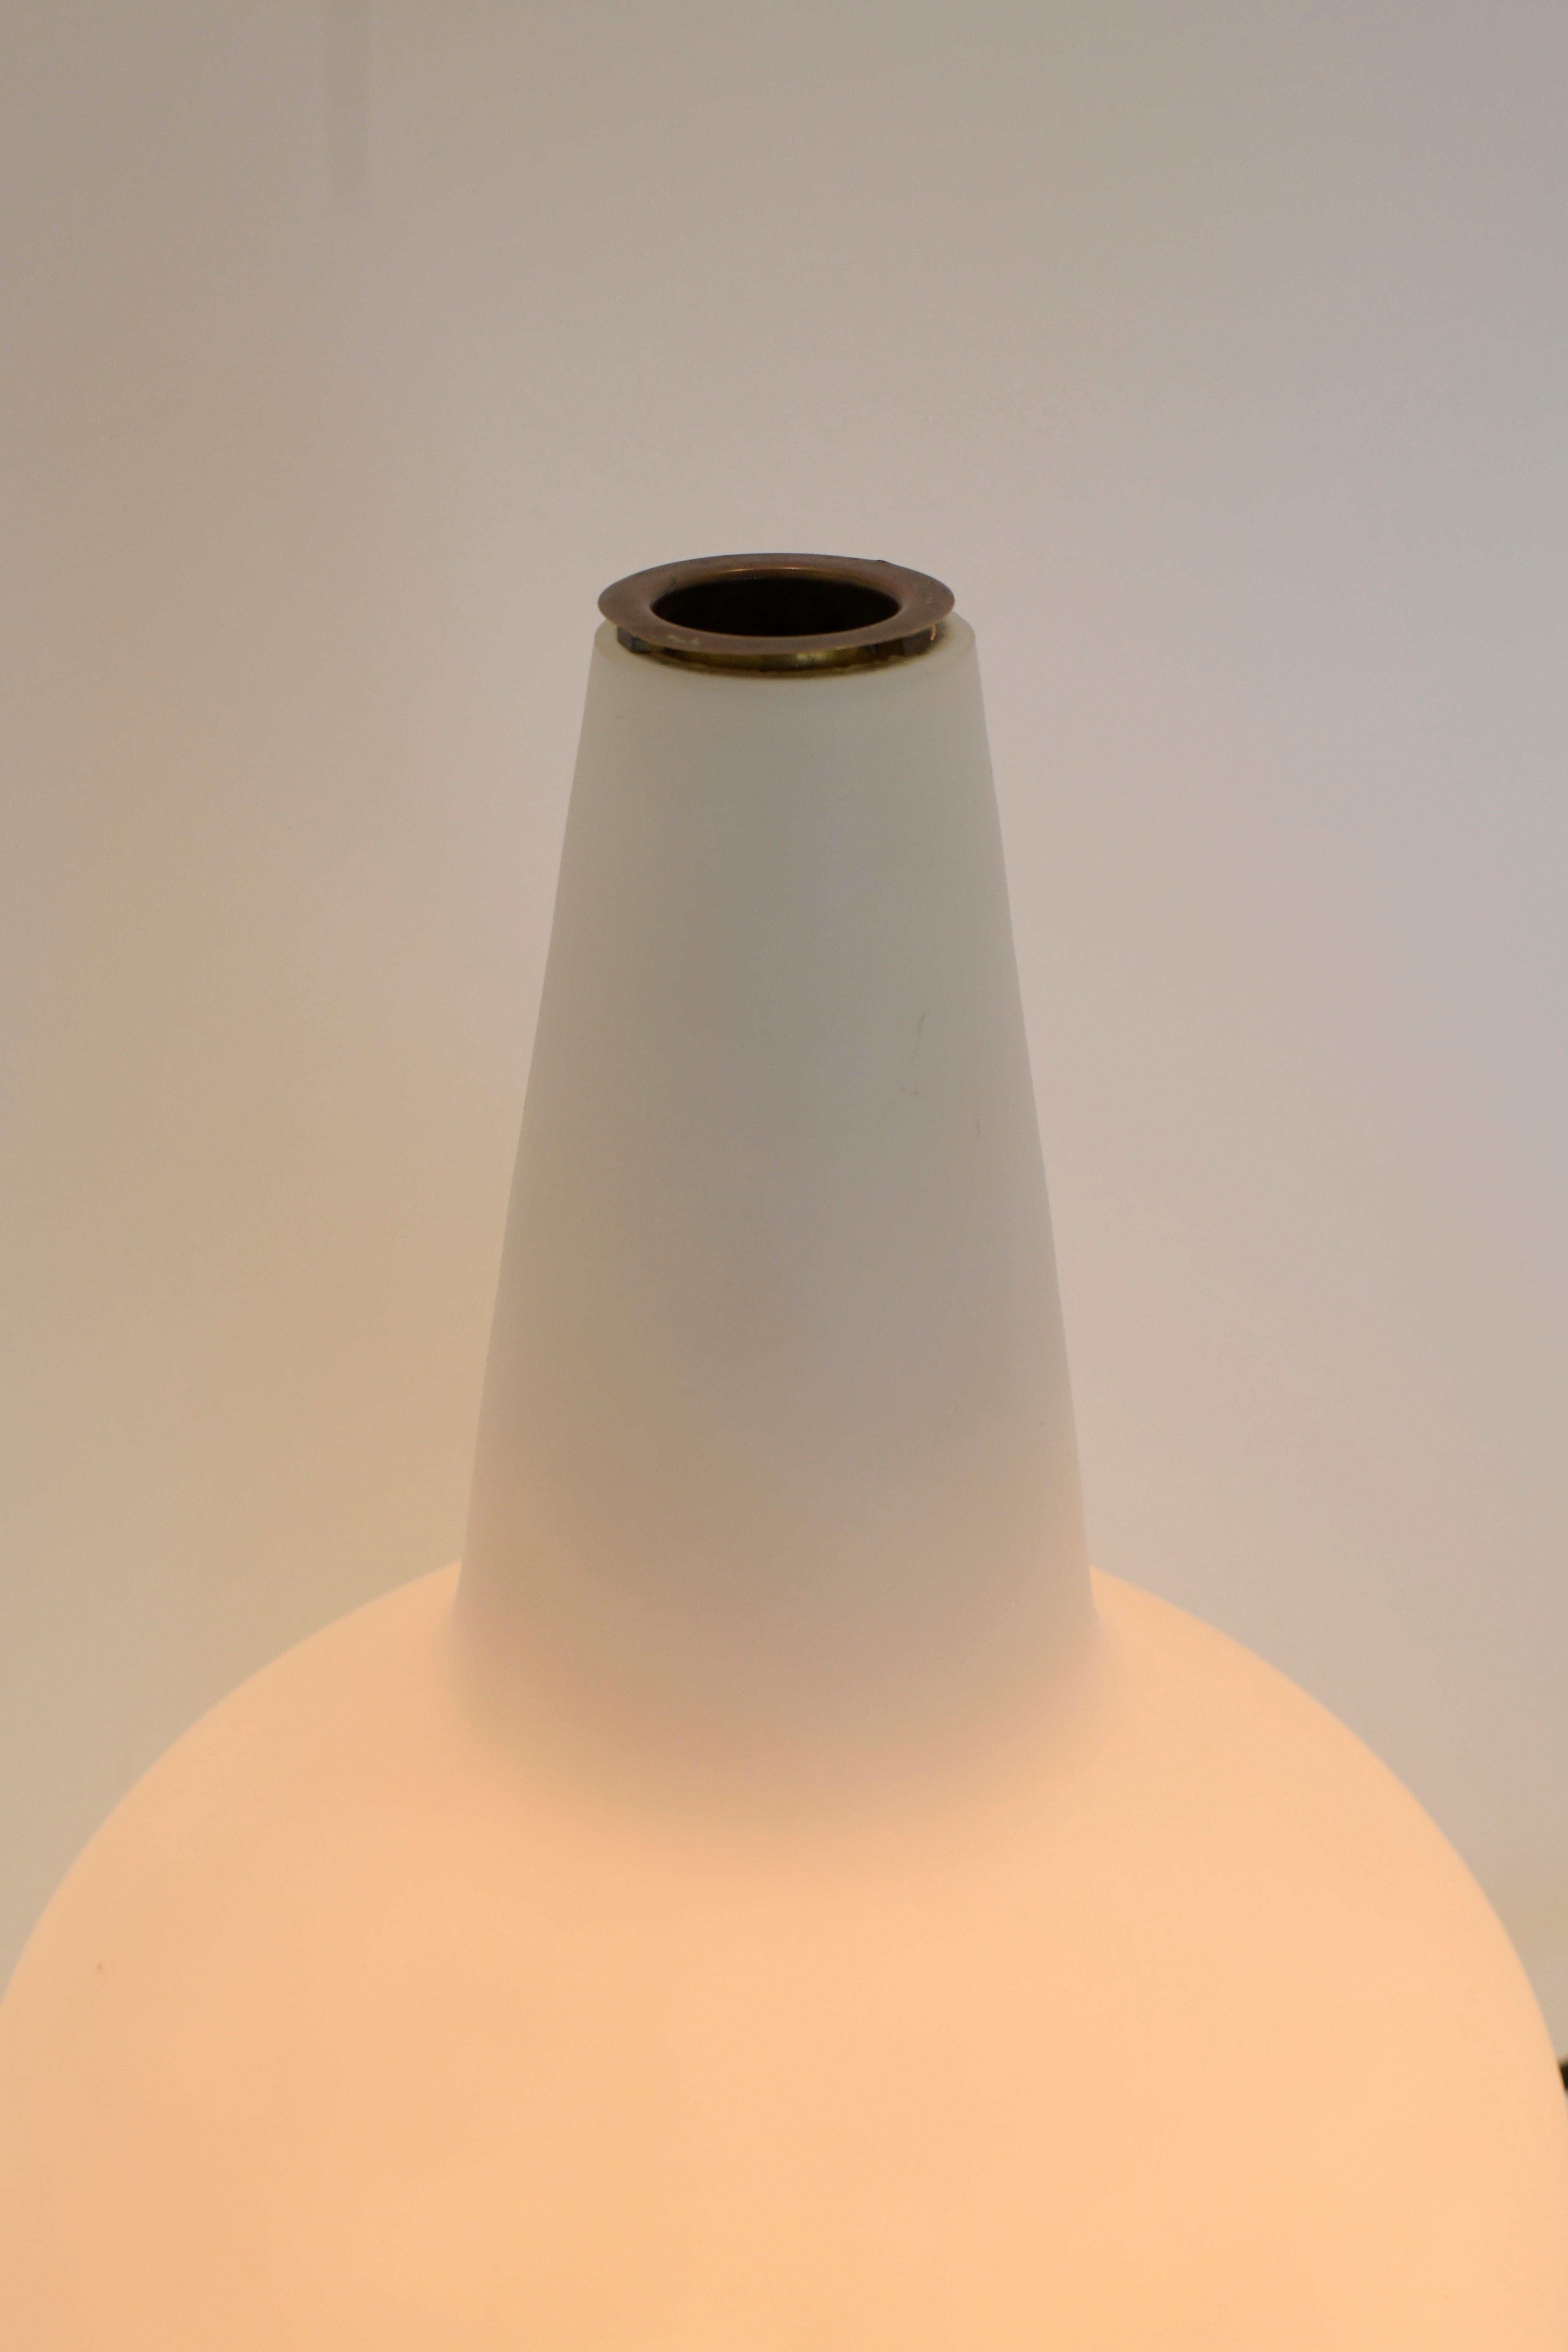 Max Ingrand OMAI Illuminated Vase for Fontana Arte  In Good Condition For Sale In Los Angeles, CA